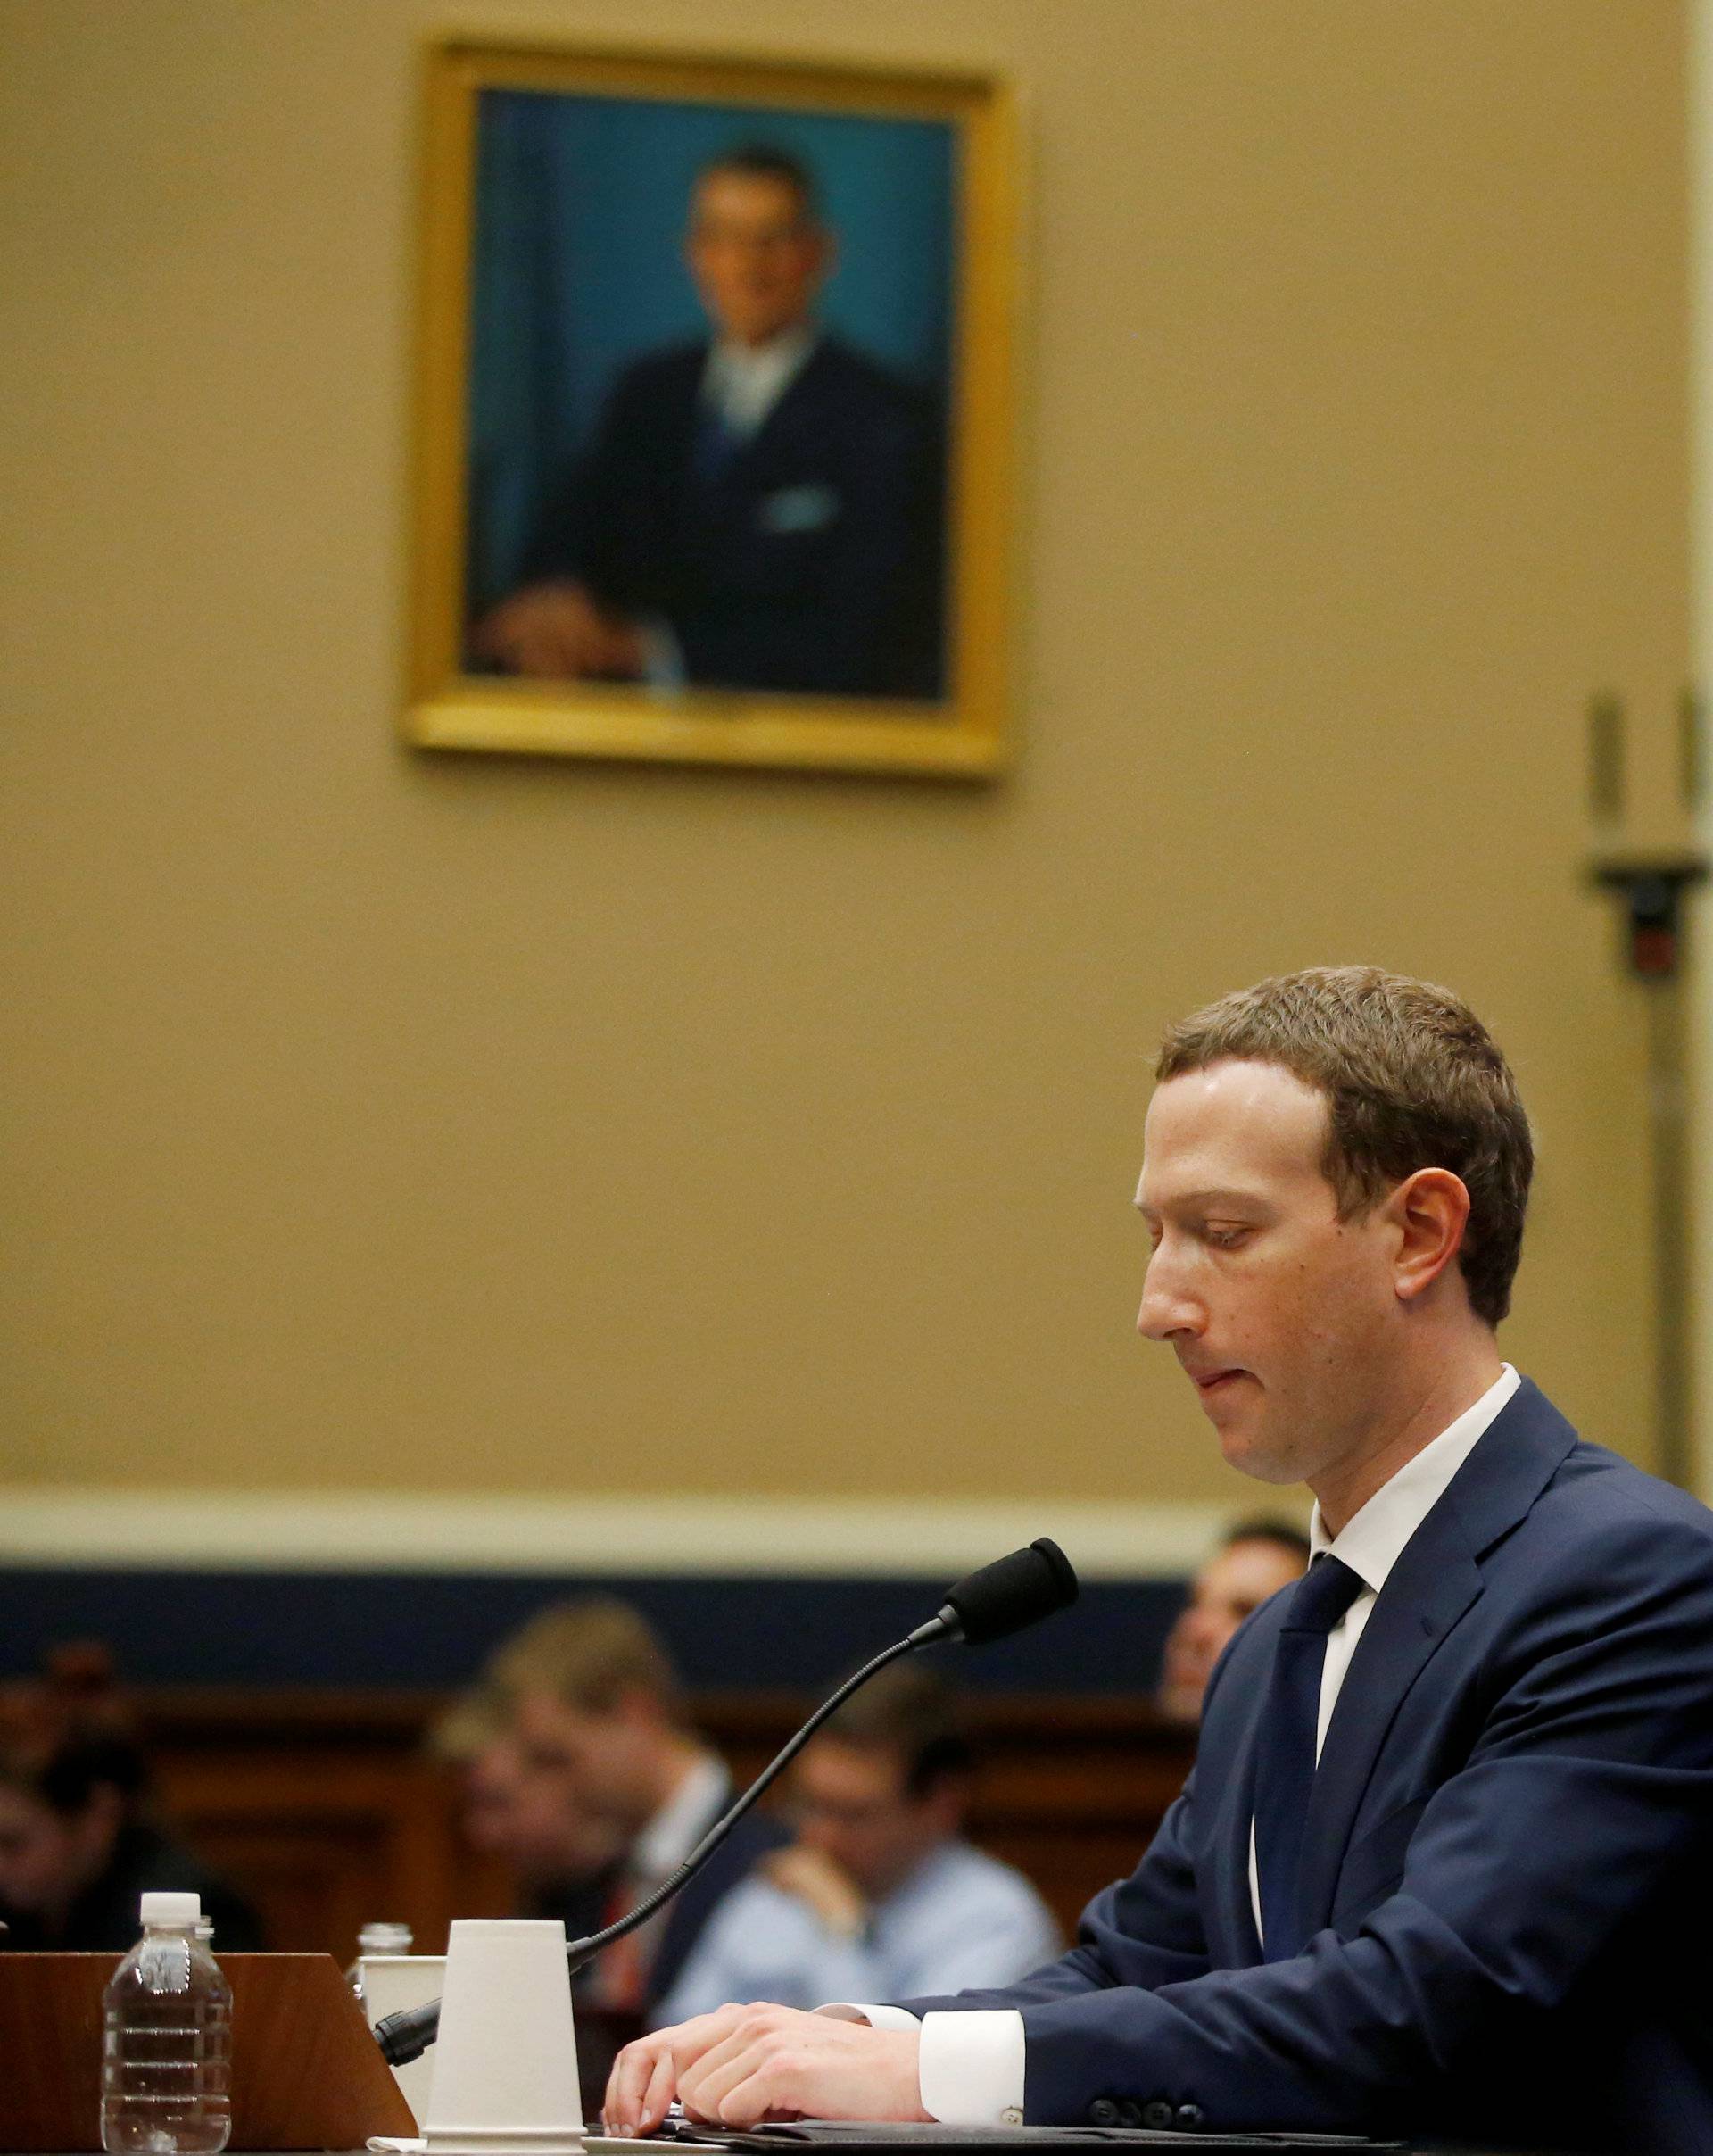 Facebook CEO Mark Zuckerberg testifies in the House Energy and Commerce Committee in Washington